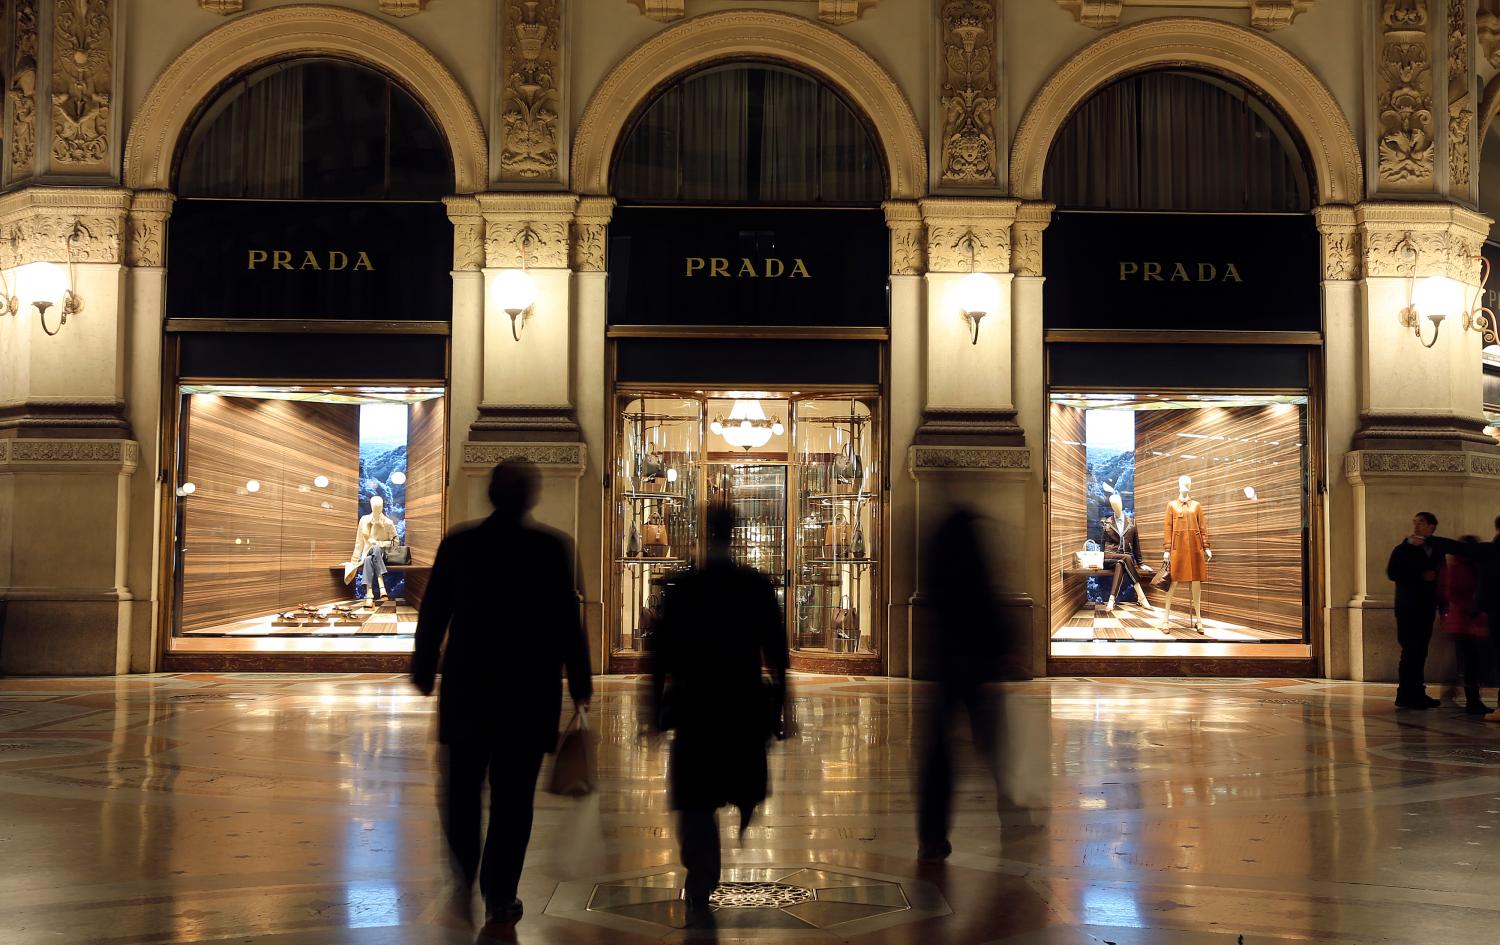 People walk past Prada's fashion store in downtown Milan February 4, 2015. The trend in luxury goods is to drum up same store sales by curbing expansion and wowing customers with new products, yet Prada continues to pay over the odds to open swanky new shops and stock them with handbags little changed from previous bestsellers. Prada, say analysts, now urgently needs to focus less on new stores and more on new handbags. Picture taken February 4. To match Analysis PRADA-STRATEGY/       REUTERS/Stefano Rellandini (ITALY - Tags: BUSINESS FASHION)